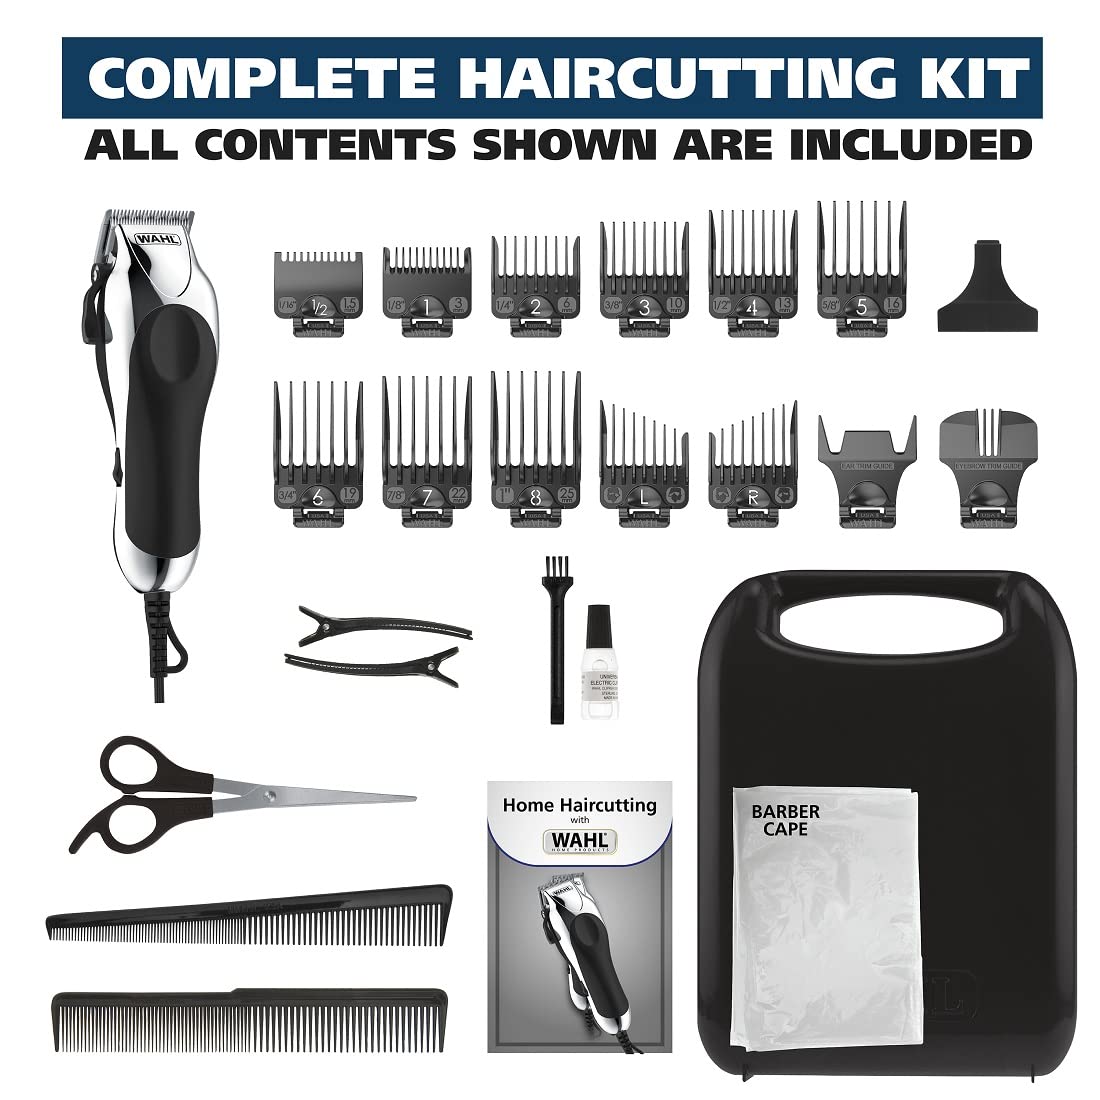 Wahl USA Chrome Pro Corded Clipper Complete Haircutting Kit for Men – Powerful Total Hair Clipping, Beard Trimming, & Grooming - Model 79524-2501